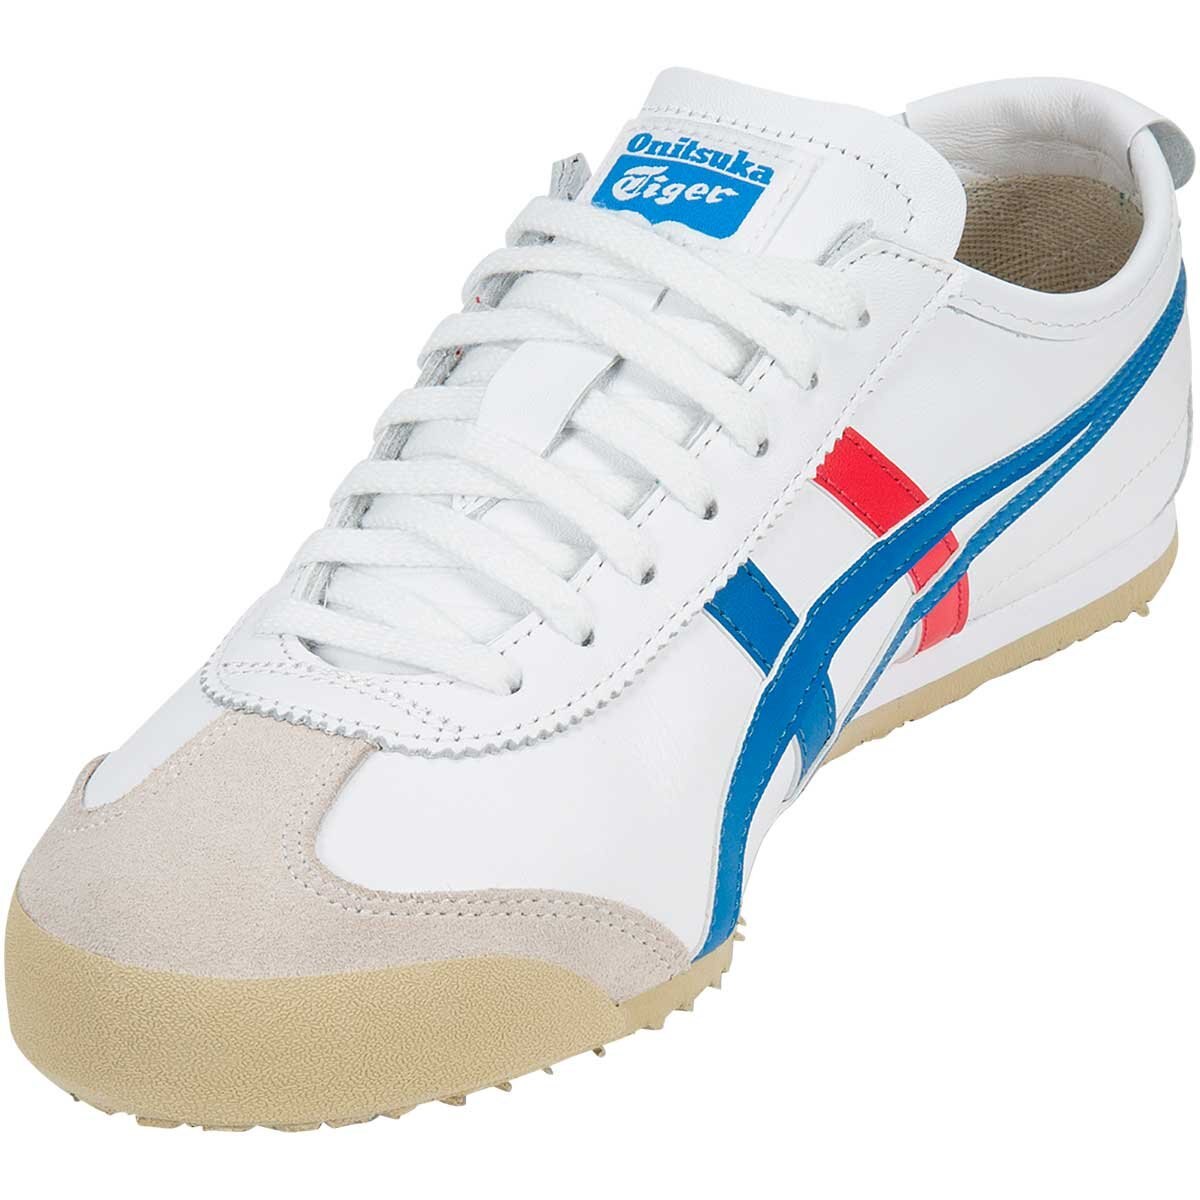 tenis tiger onitsuka mexico cheap online